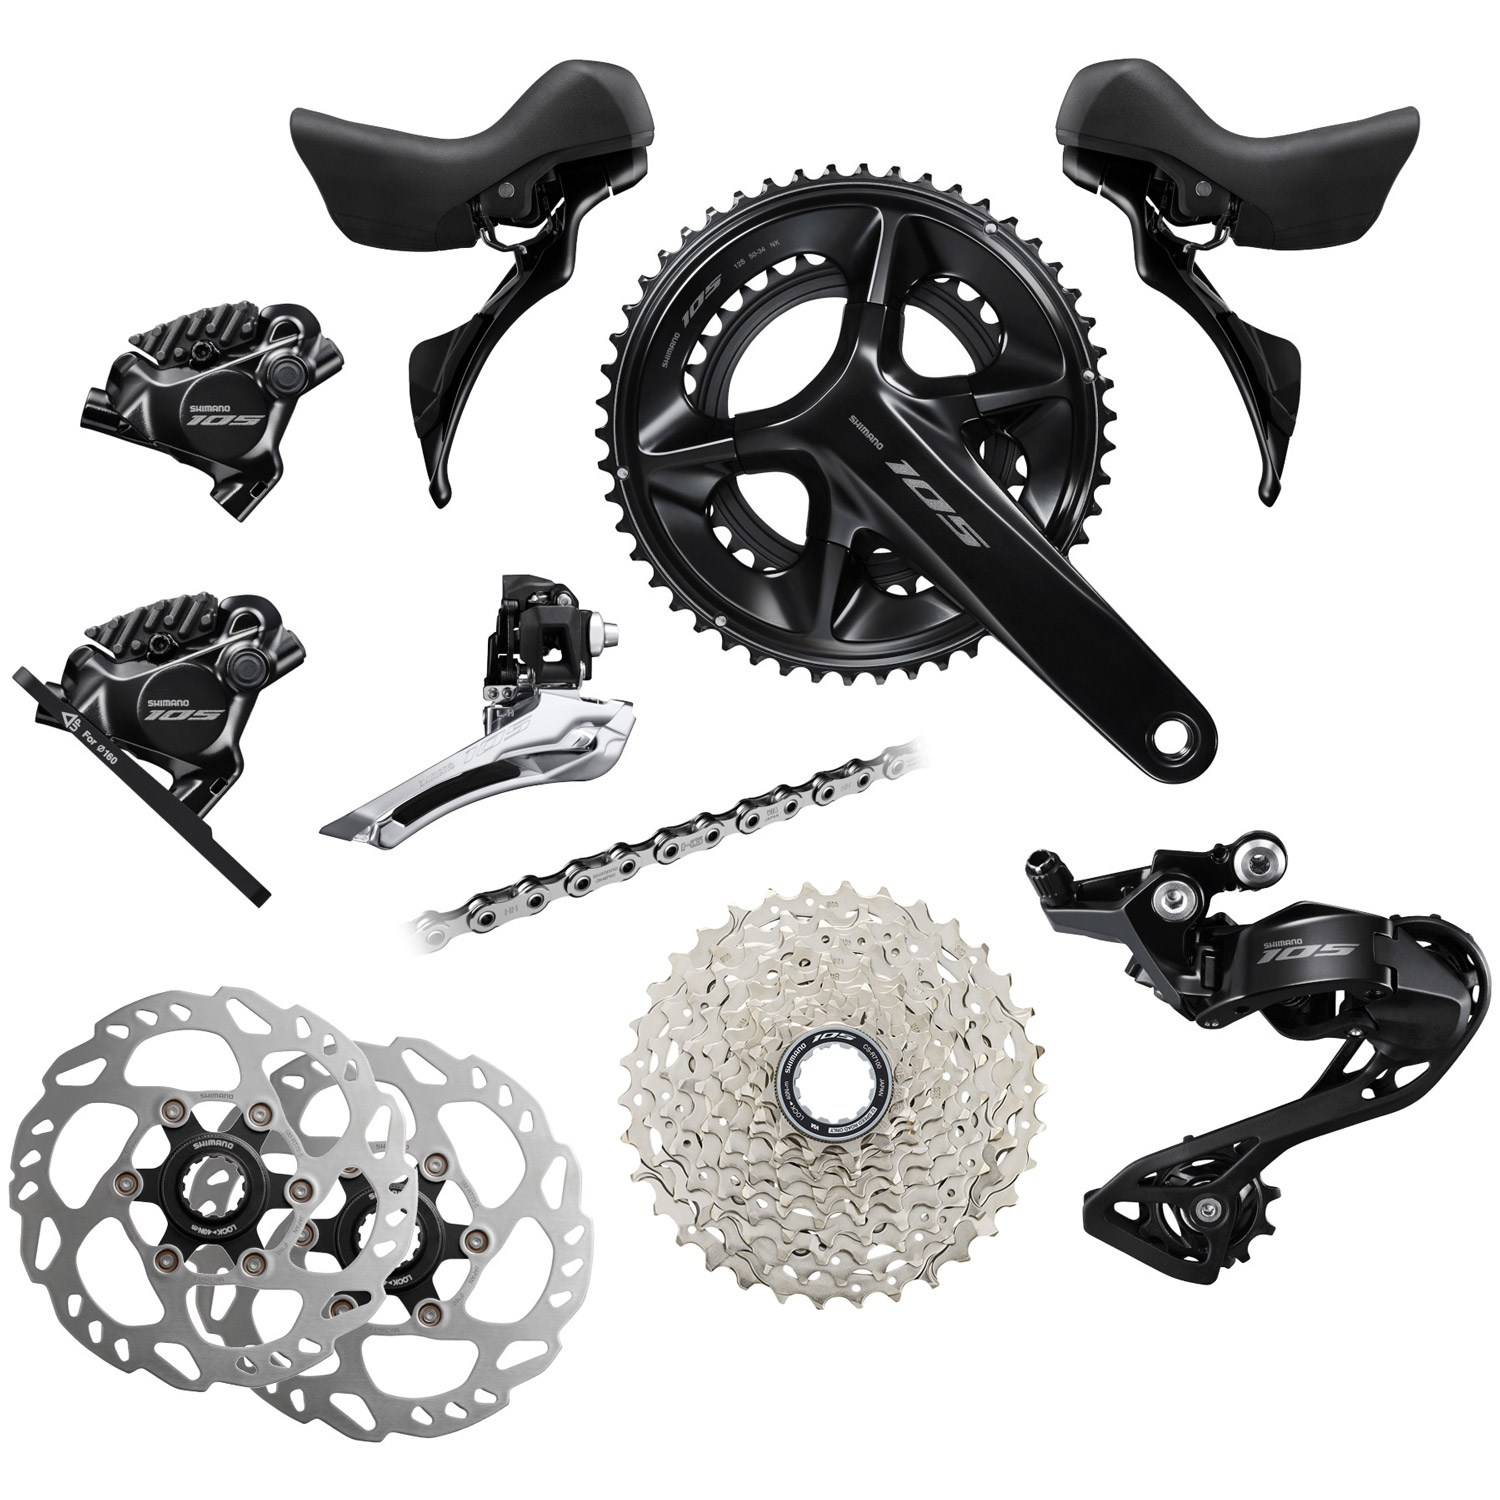 Picture of Shimano 105 R7100 Groupset - 2x12-speed - Special Offer